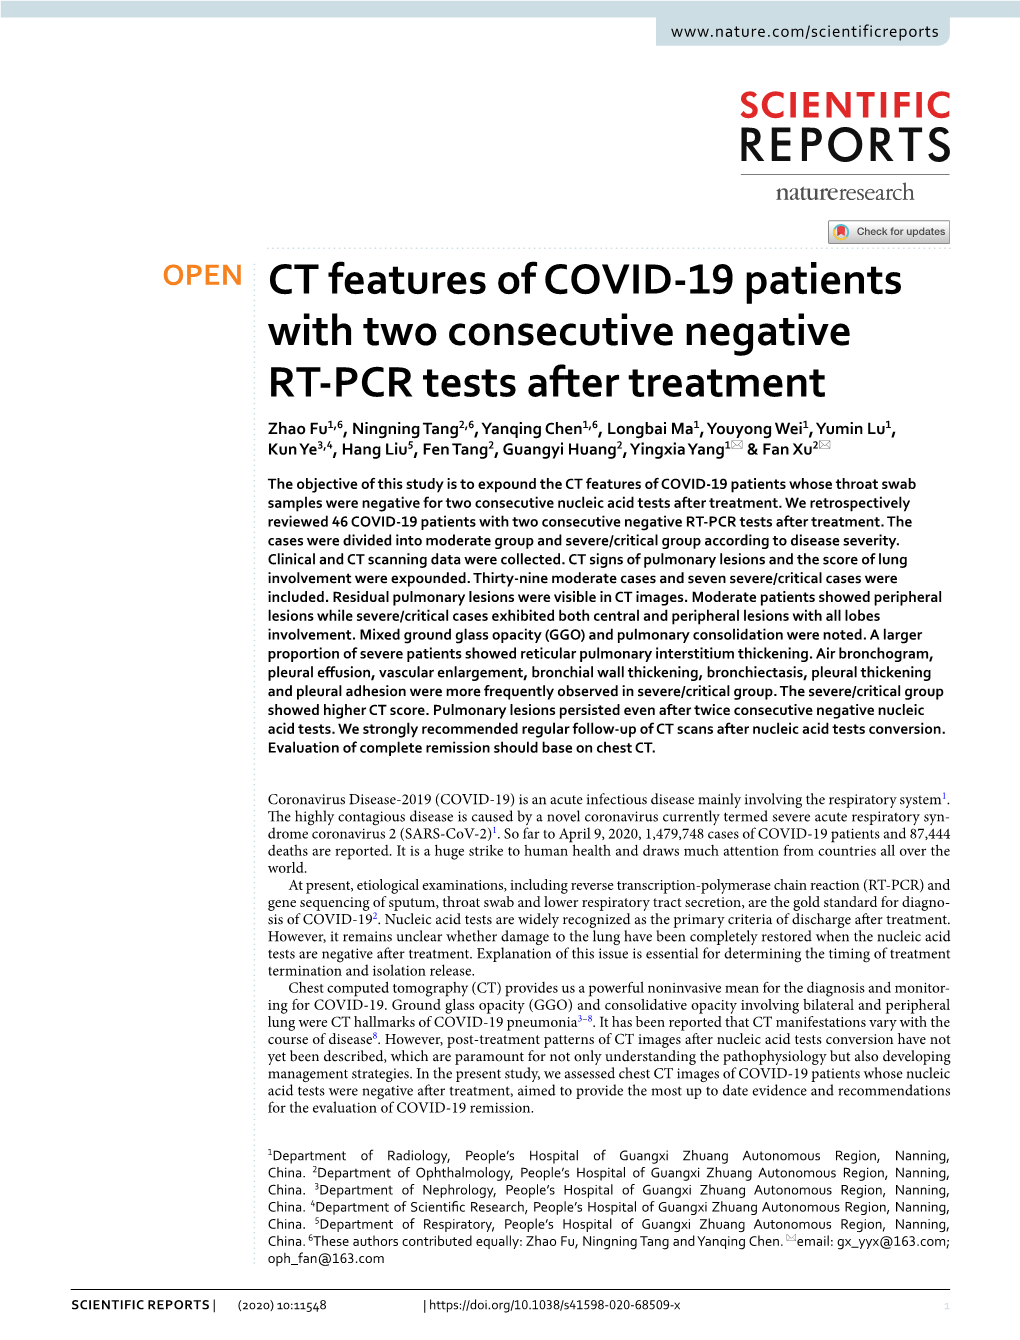 CT Features of COVID-19 Patients with Two Consecutive Negative RT-PCR Tests Afer Treatment